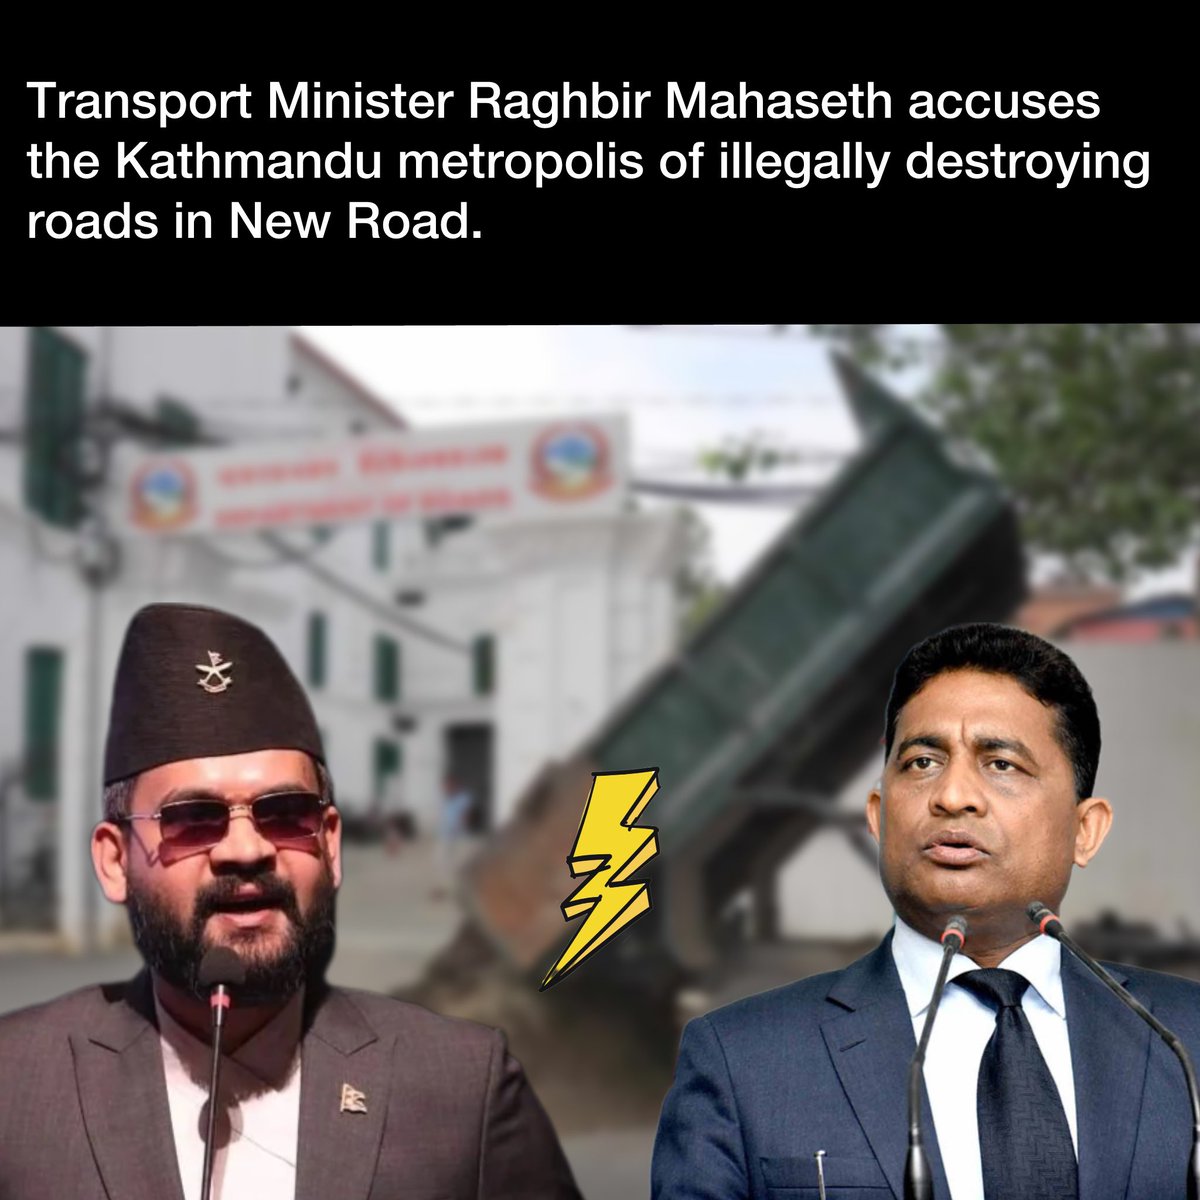 NOW THIS NEWS: The Transport Minister Raghbir Mahaseth has accused the Kathmandu metropolis of illegally destroying roads in New Road. He also warned the metropolis to not repeat such activities in coming days. 

Thoughts?
#nonextquestion